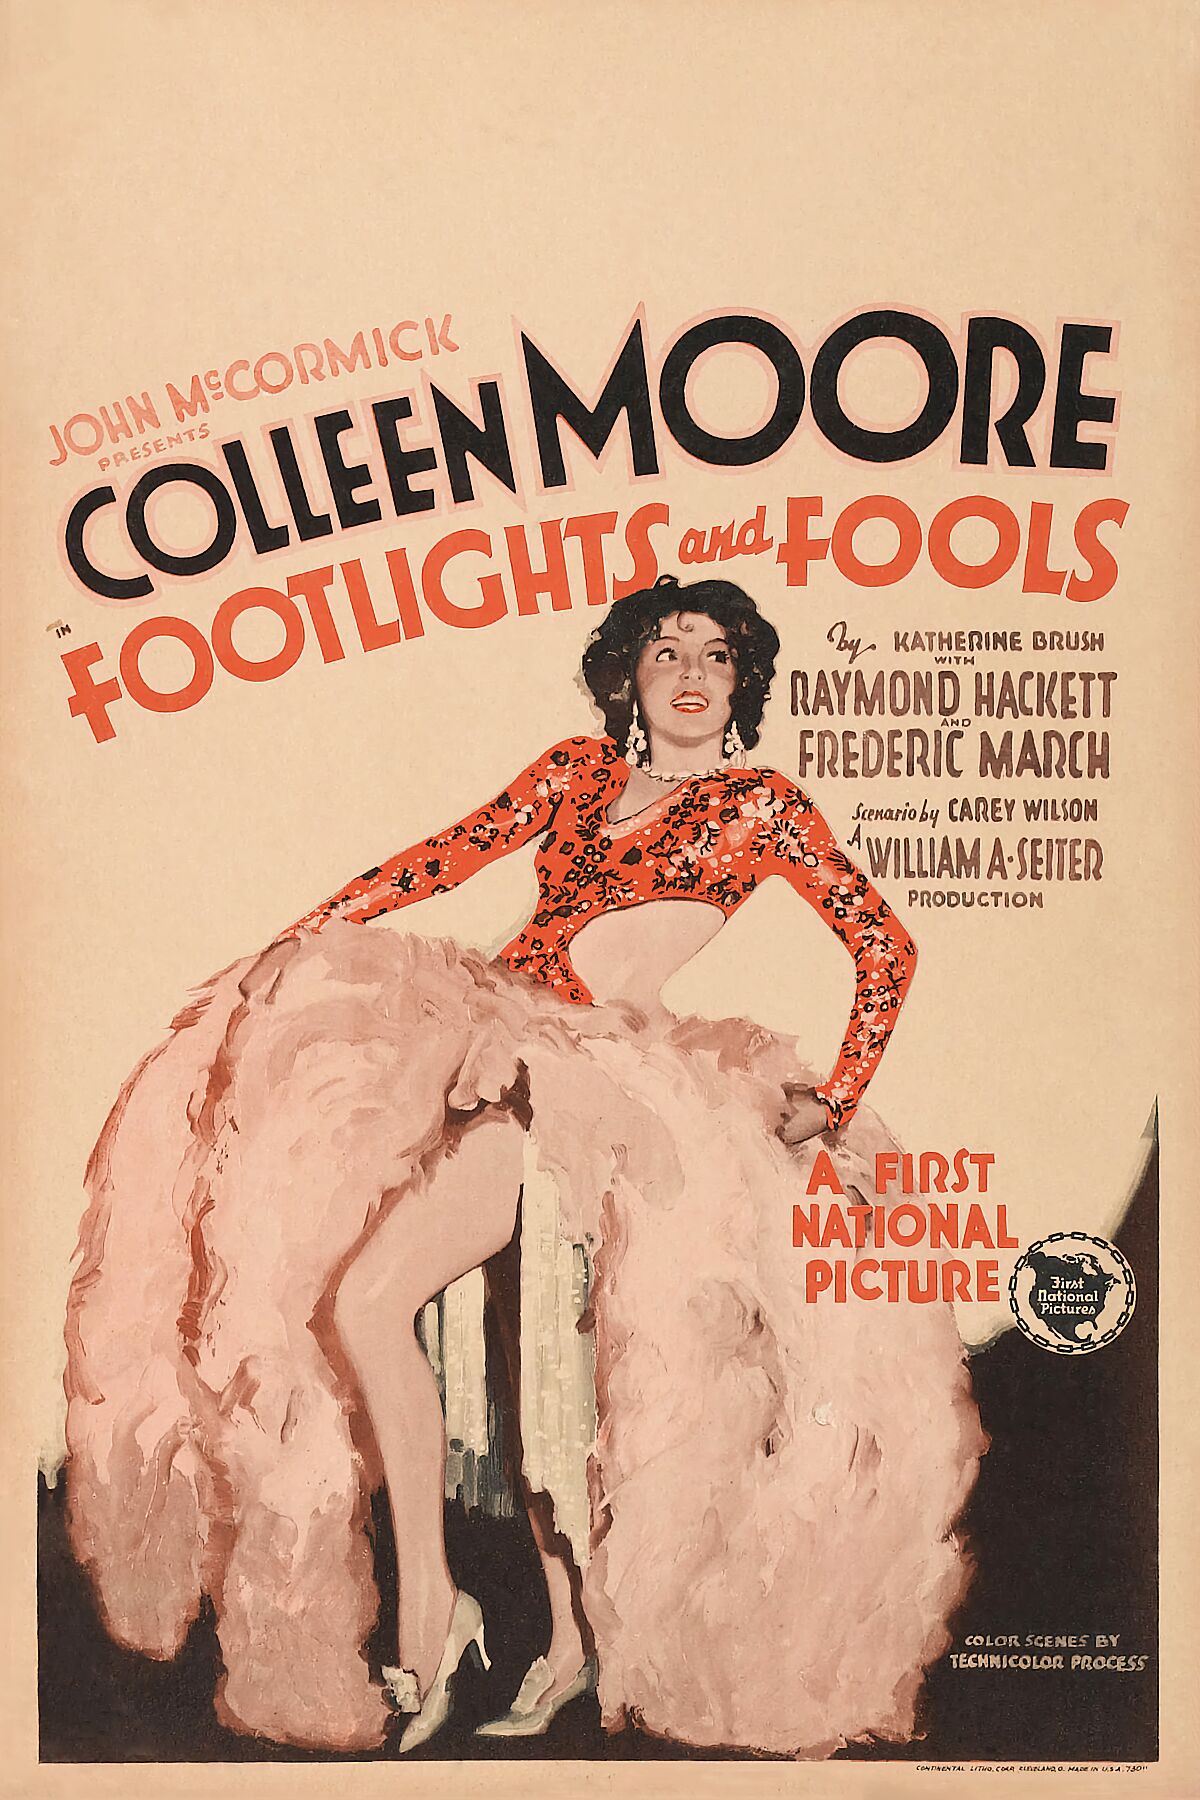 Poster for the American film Footlights and Fools (1929).